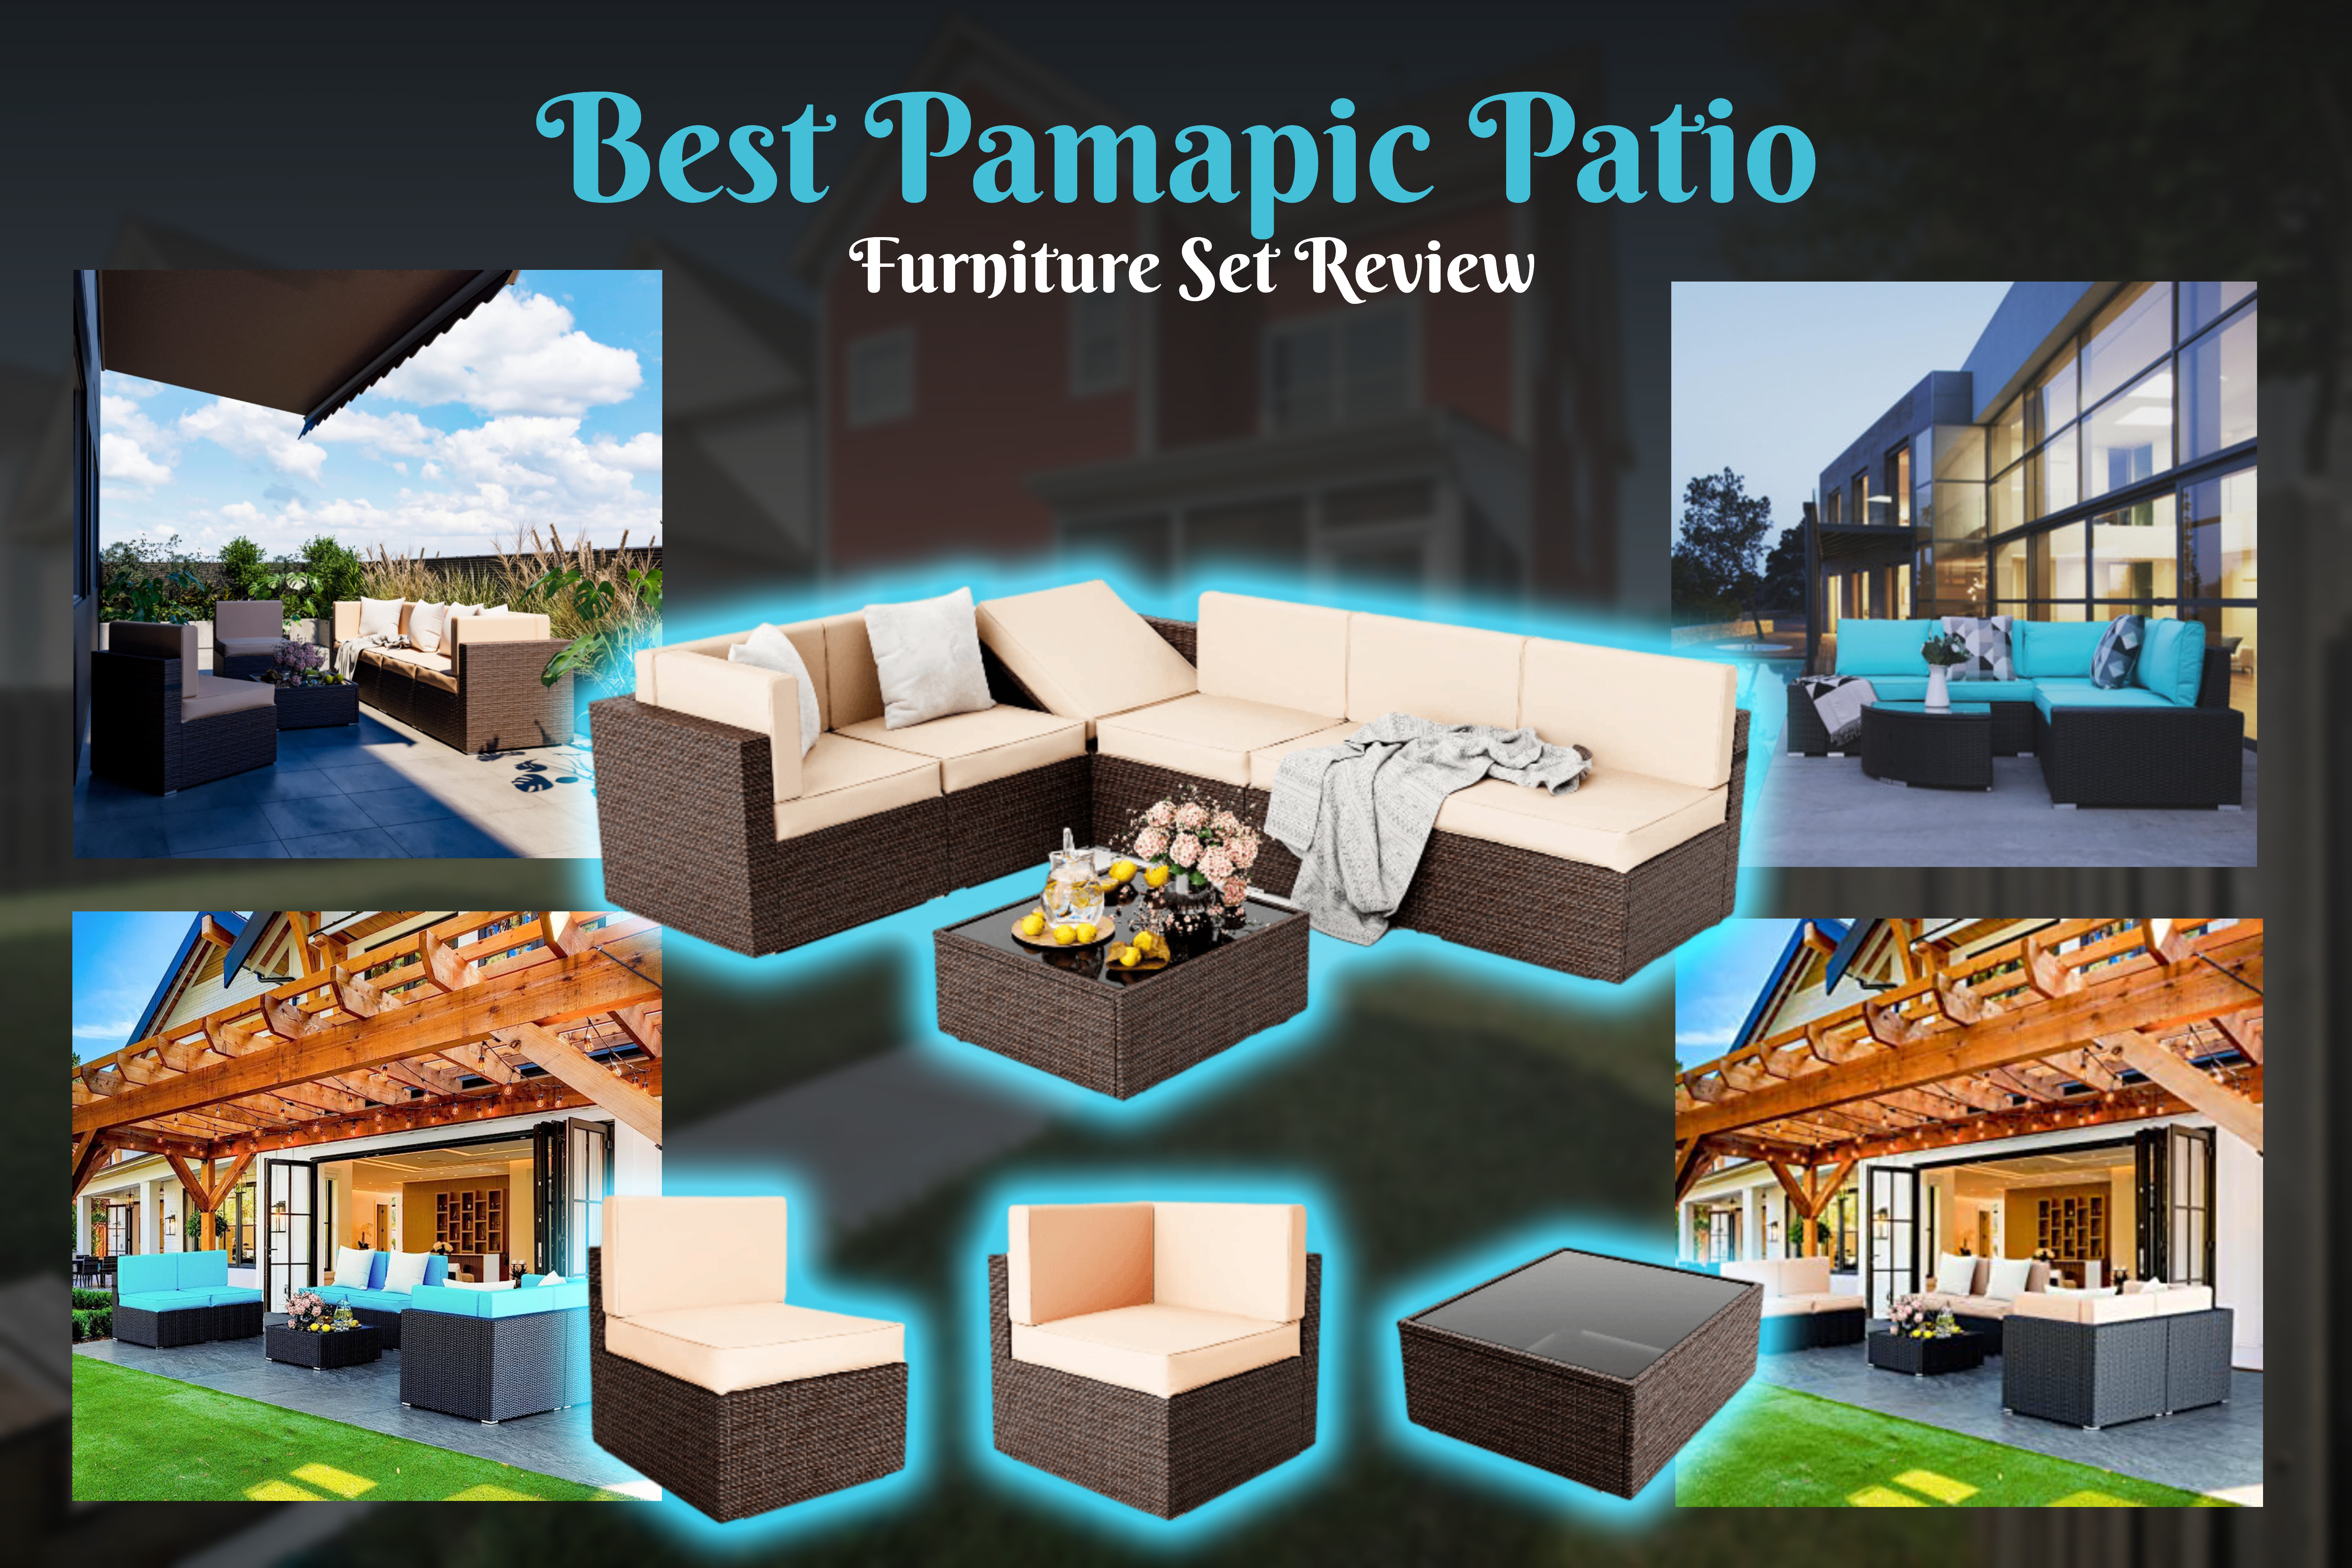 Pamapic Patio Furniture Set, 7 Pieces Modular Outdoor Sectional, Wicker Patio Sectional Sofa Conversation Set, Rattan Sofa with Coffee Table and Washable Cushions Covers, Brown Rattan(Beige Cushions)